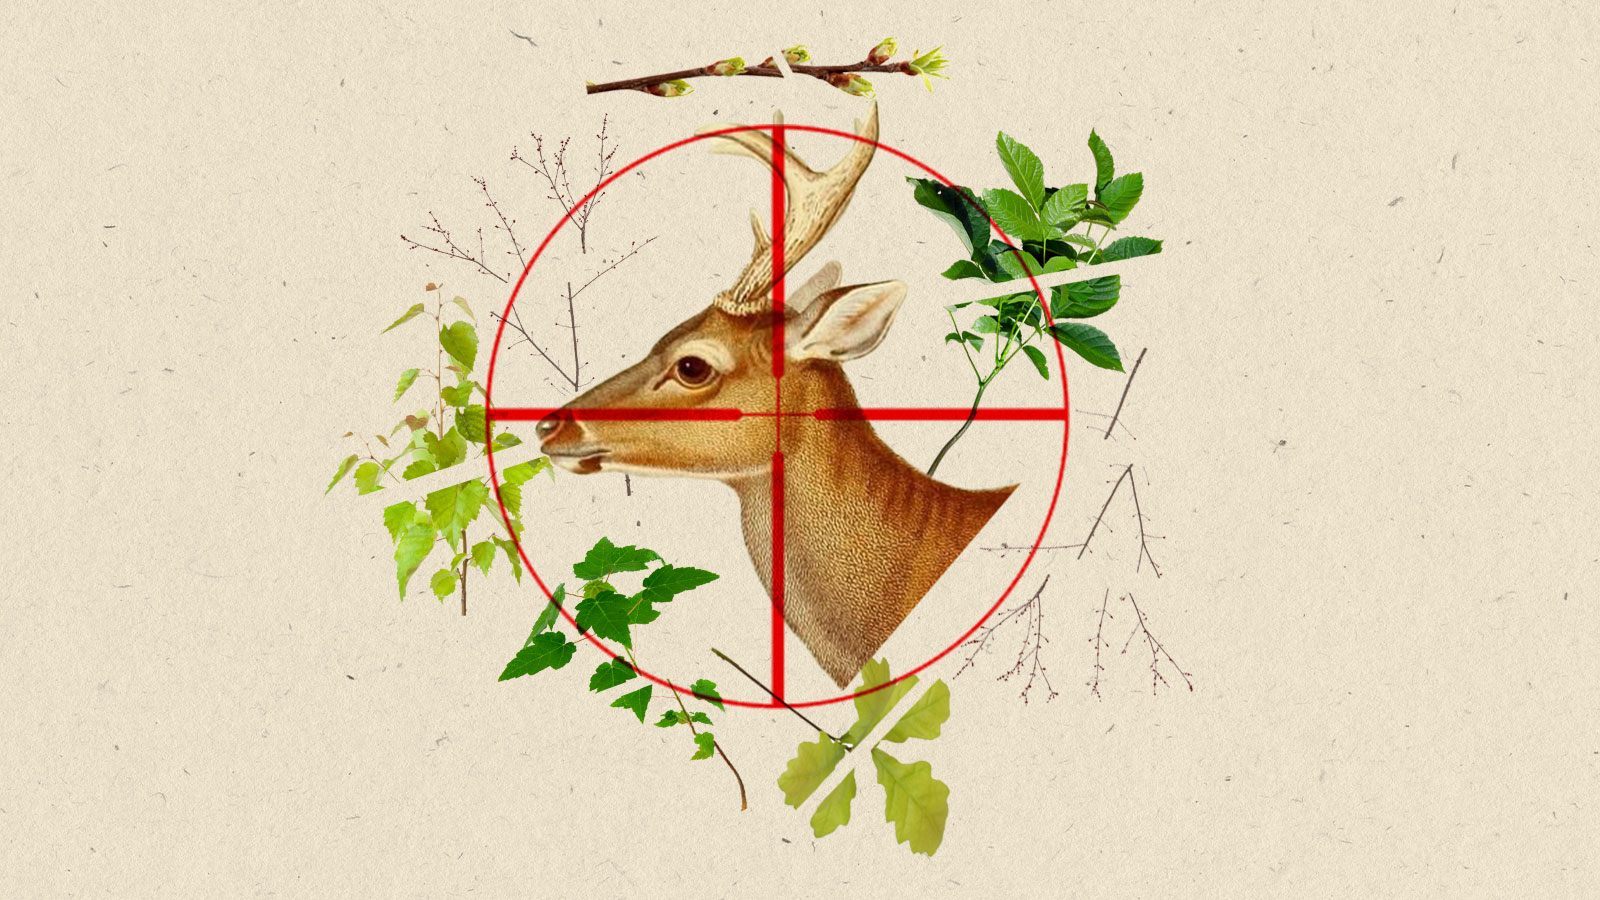 Collage of illustrated white-tailed deer head surrounded by cutouts of tree saplings and a red hunting crosshair target on top